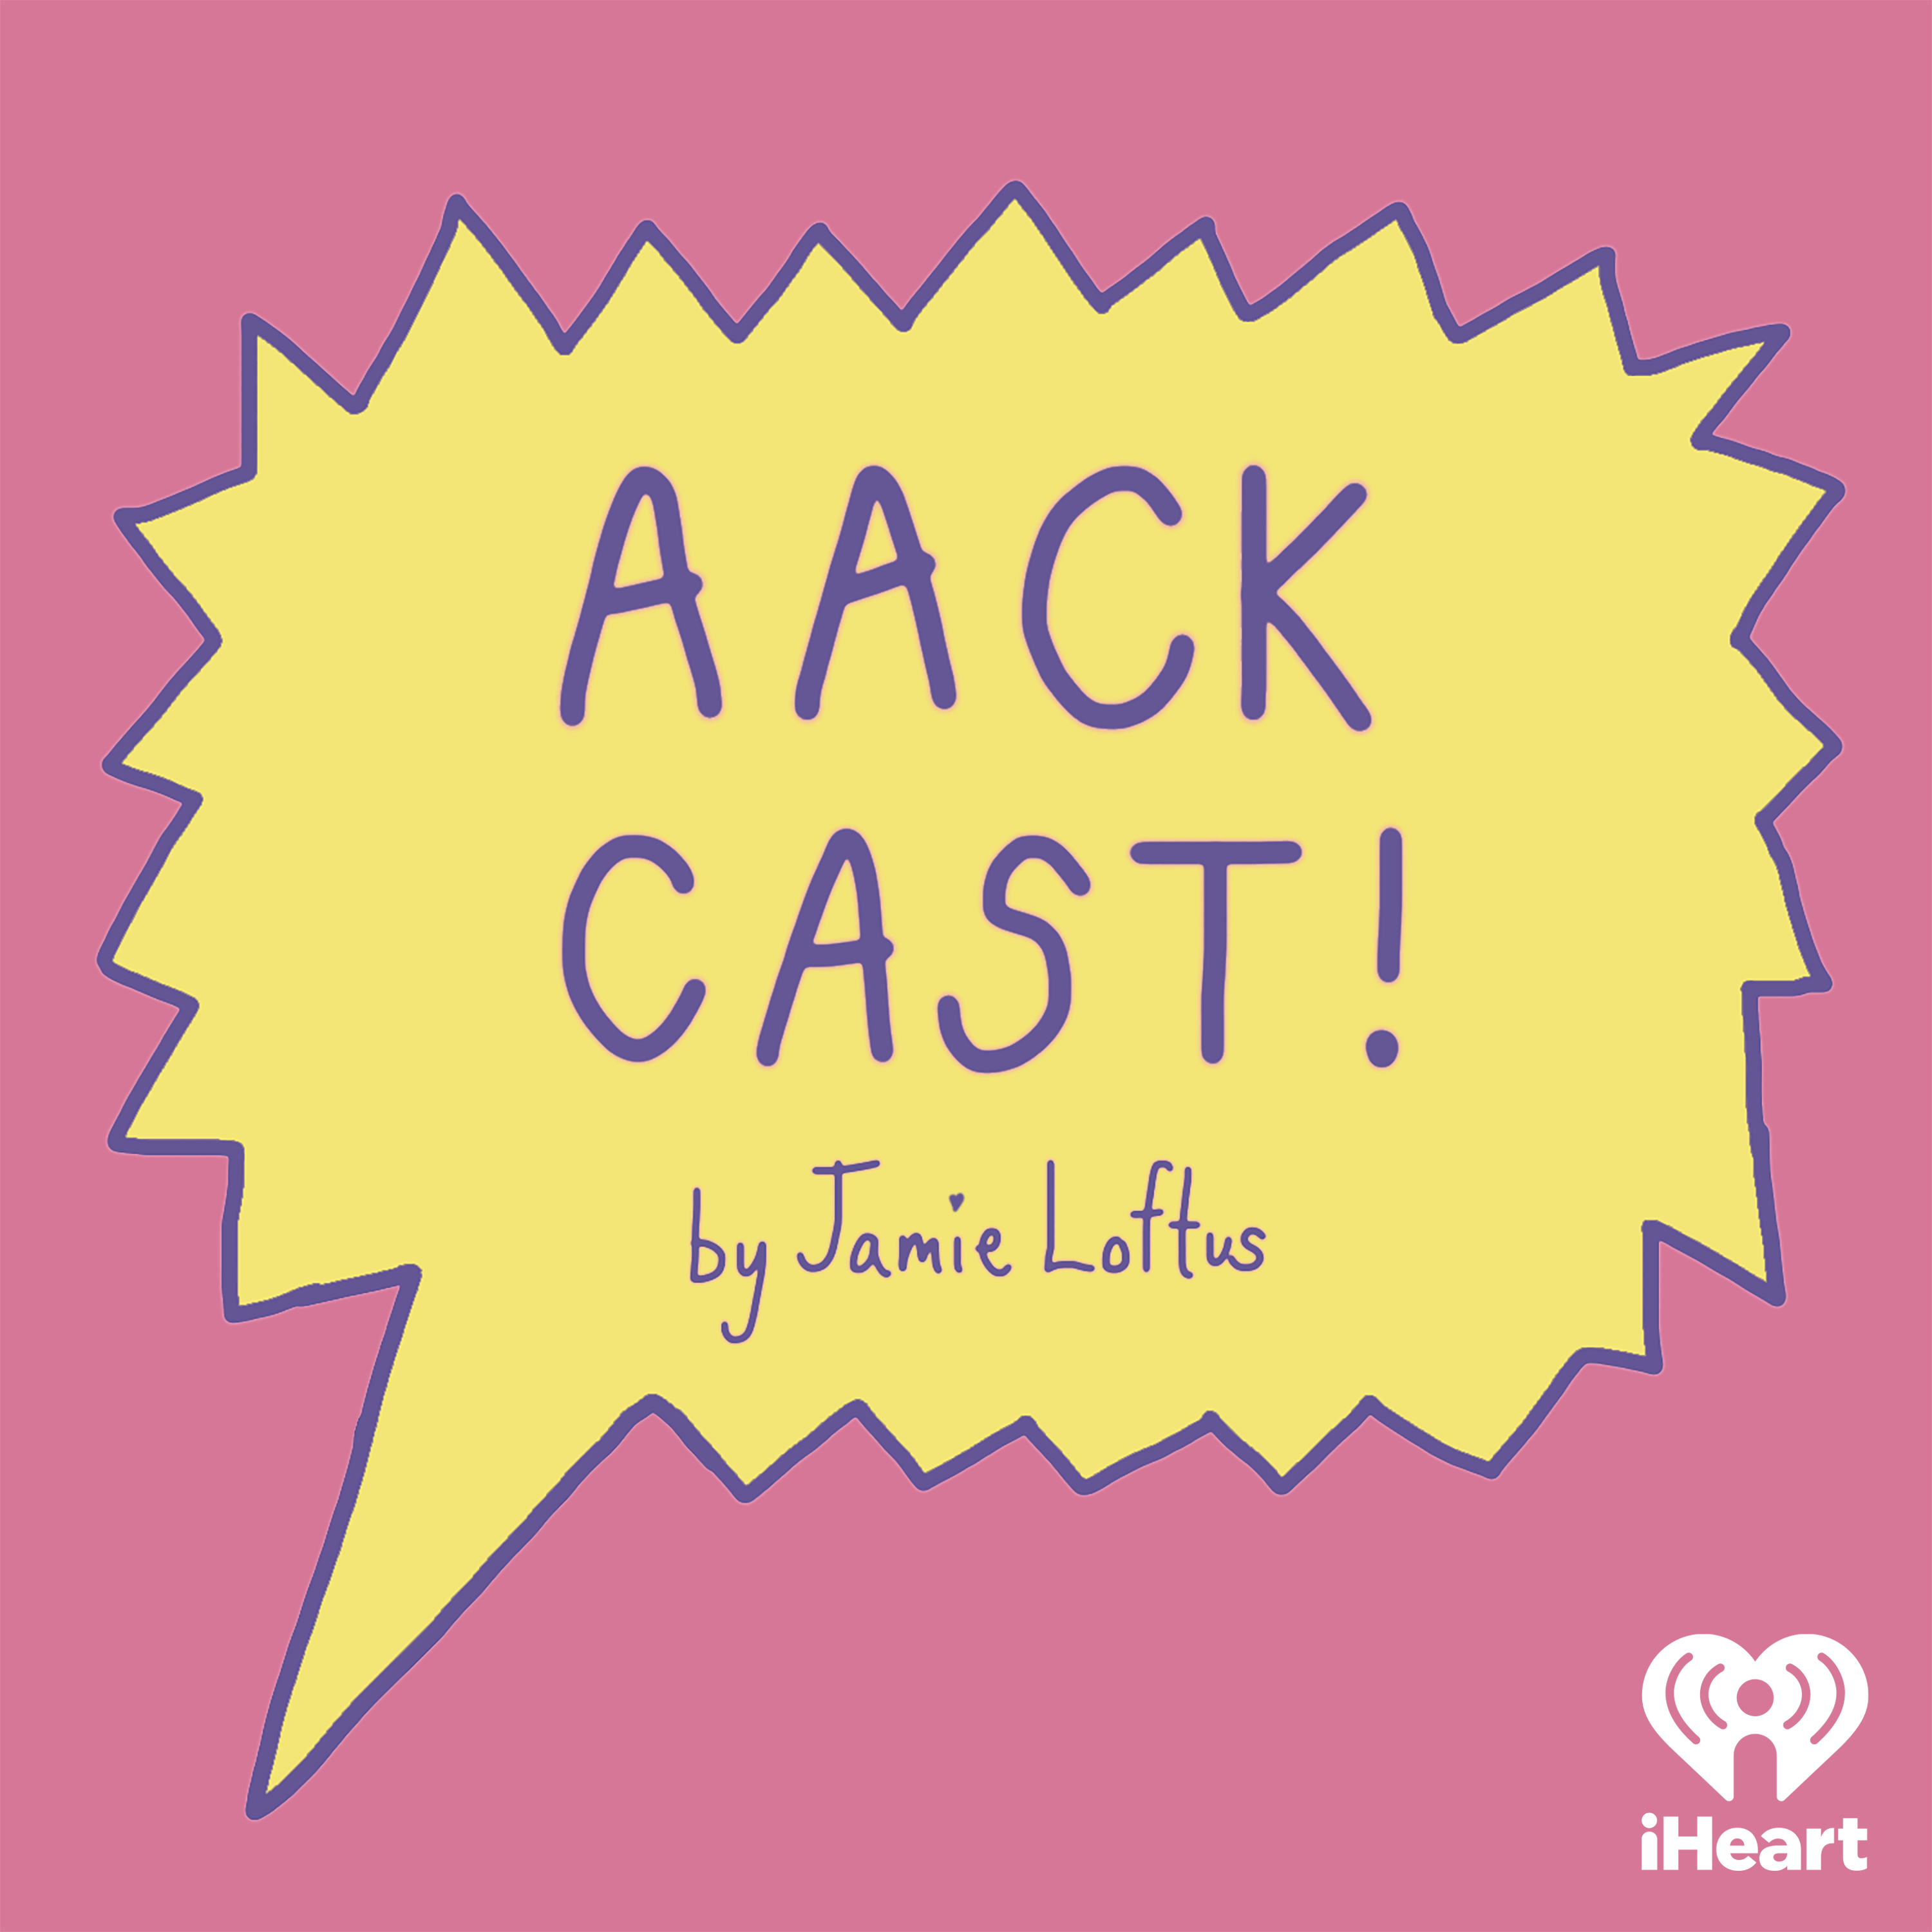 Aackt 3: Cathy and American Feminist Backlash